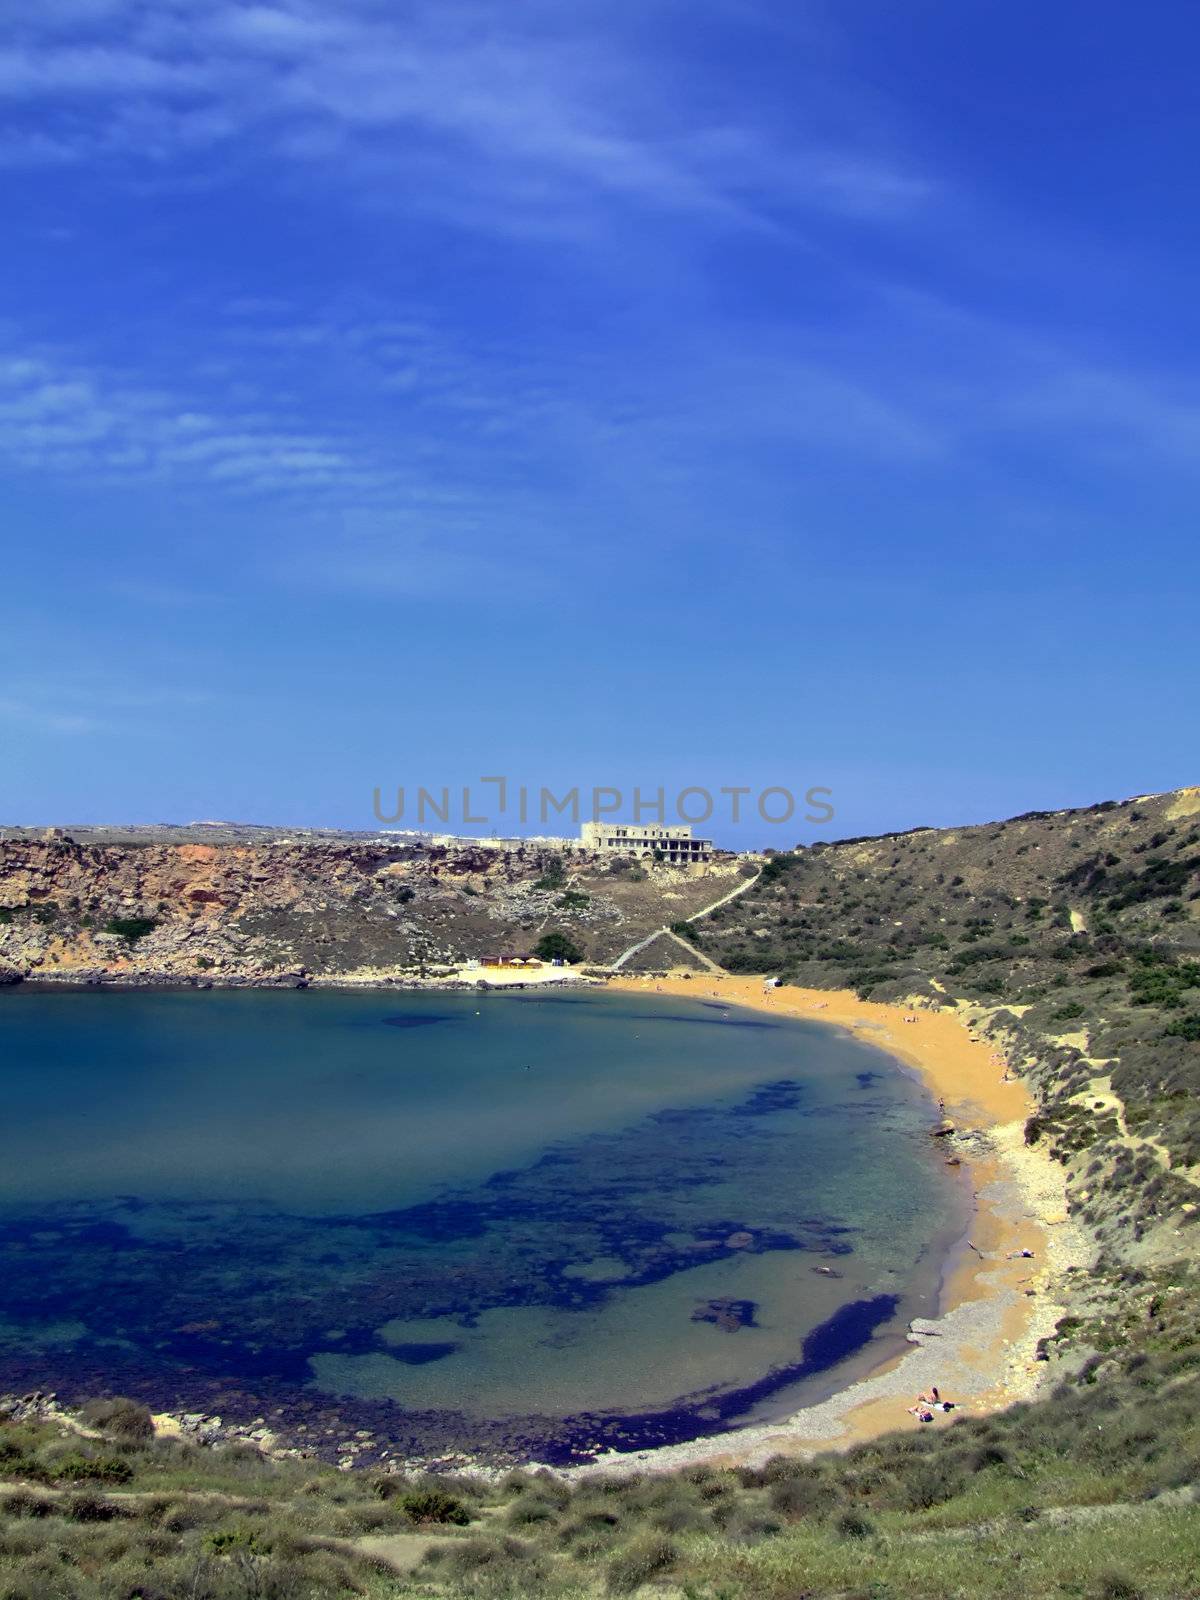 One of the most beautiful beaches on the Mediterranean island of Malta